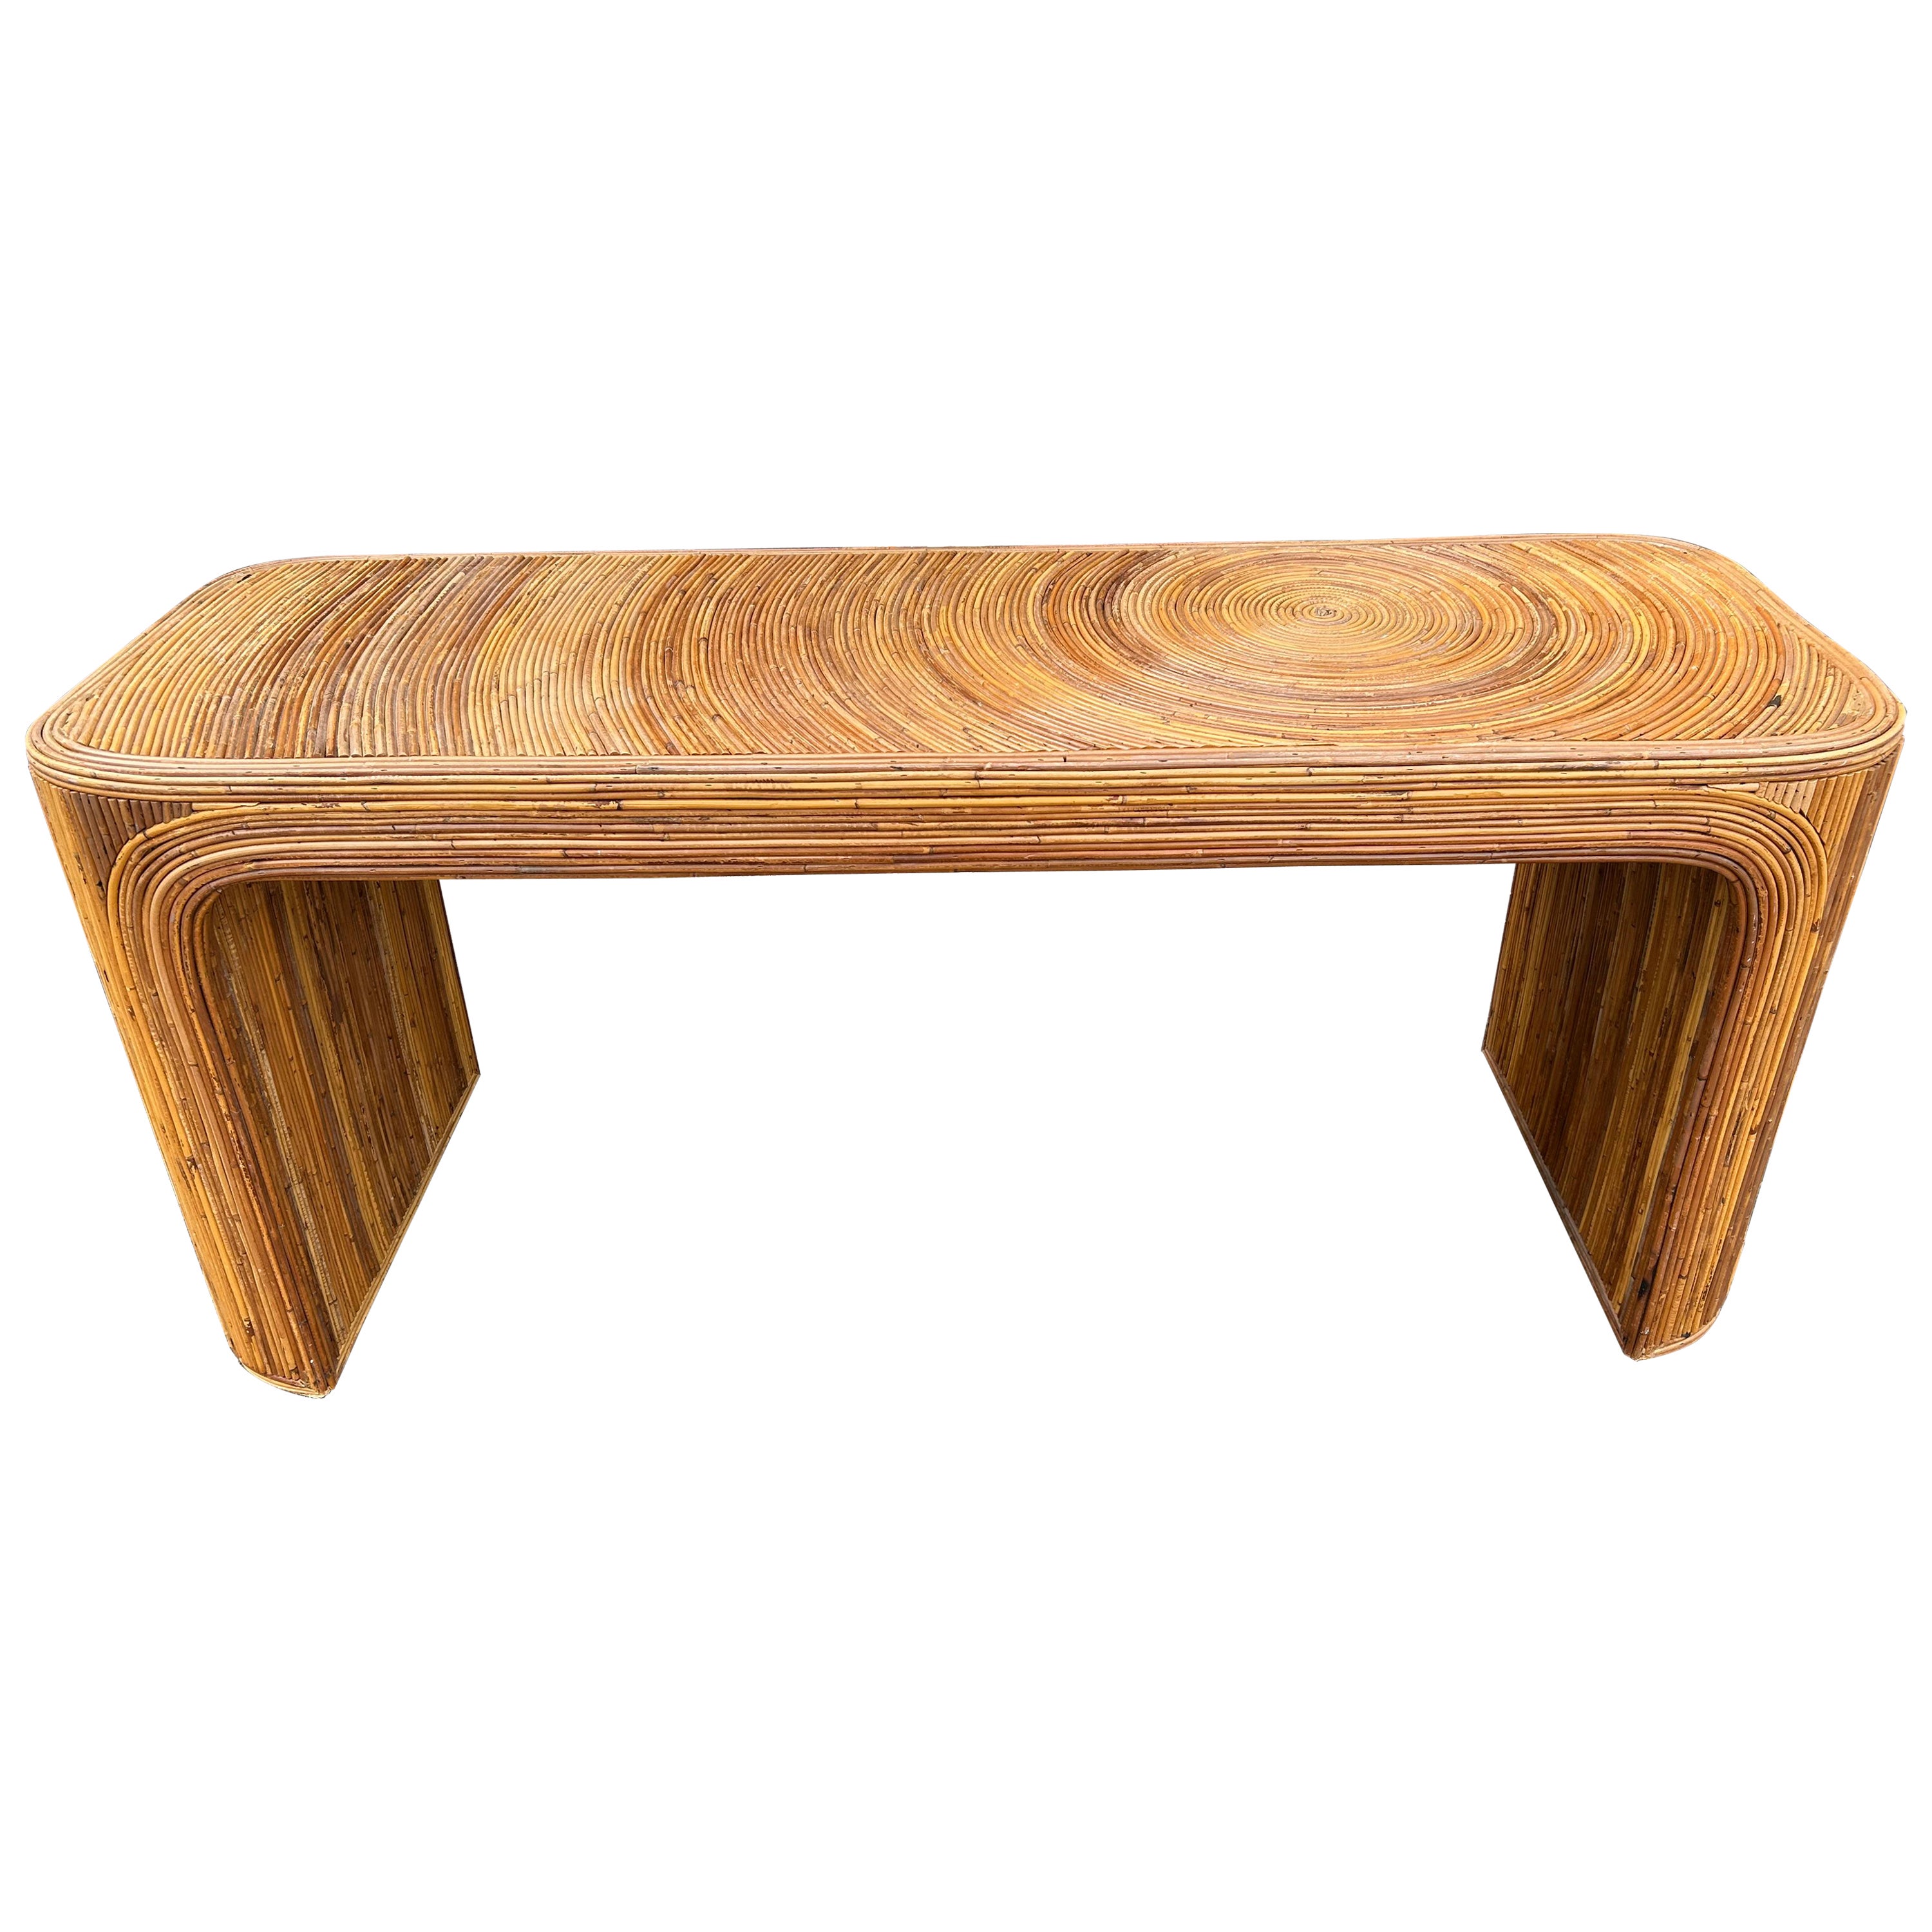 Sensational Gabriella  Crespi style Pencil Reed Console table Mid Century Modern For Sale